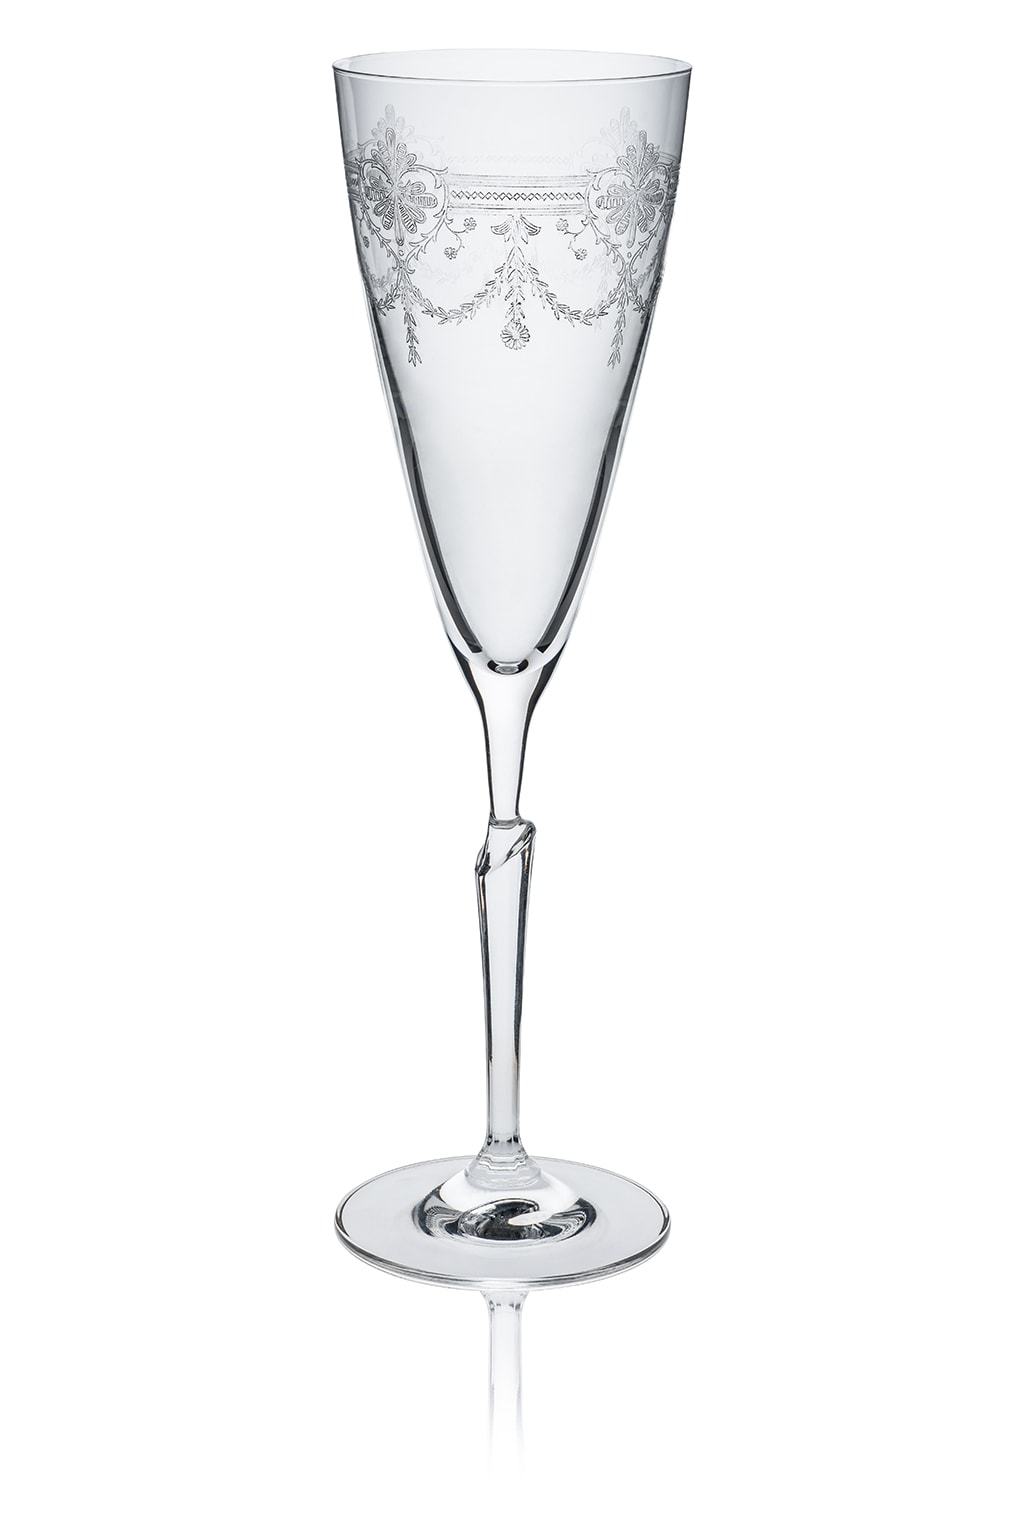 First Lady Champagne Flute - part of set of 6 drinking glasses